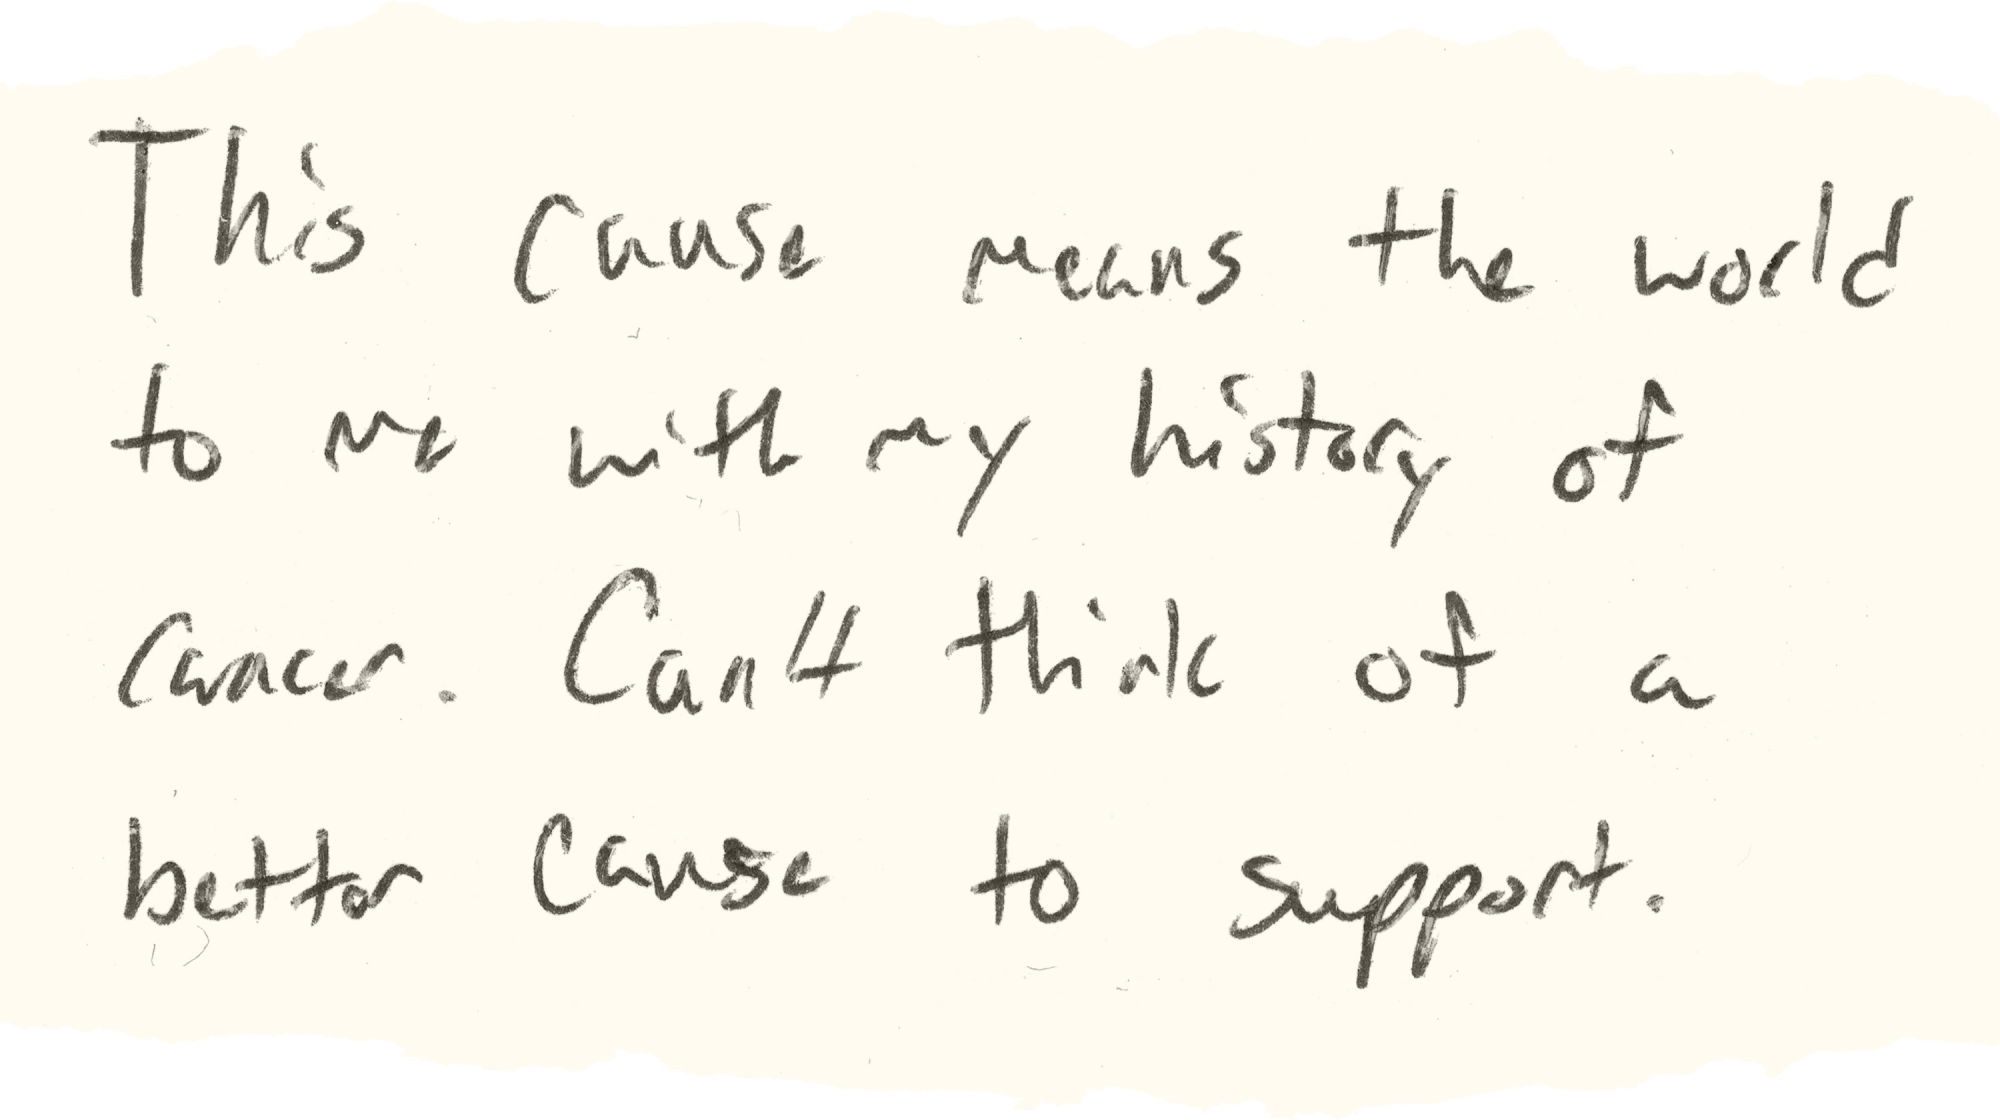 Handwriting: This cause means the world to me with my history of cancer. Can't think of a better cause to support.